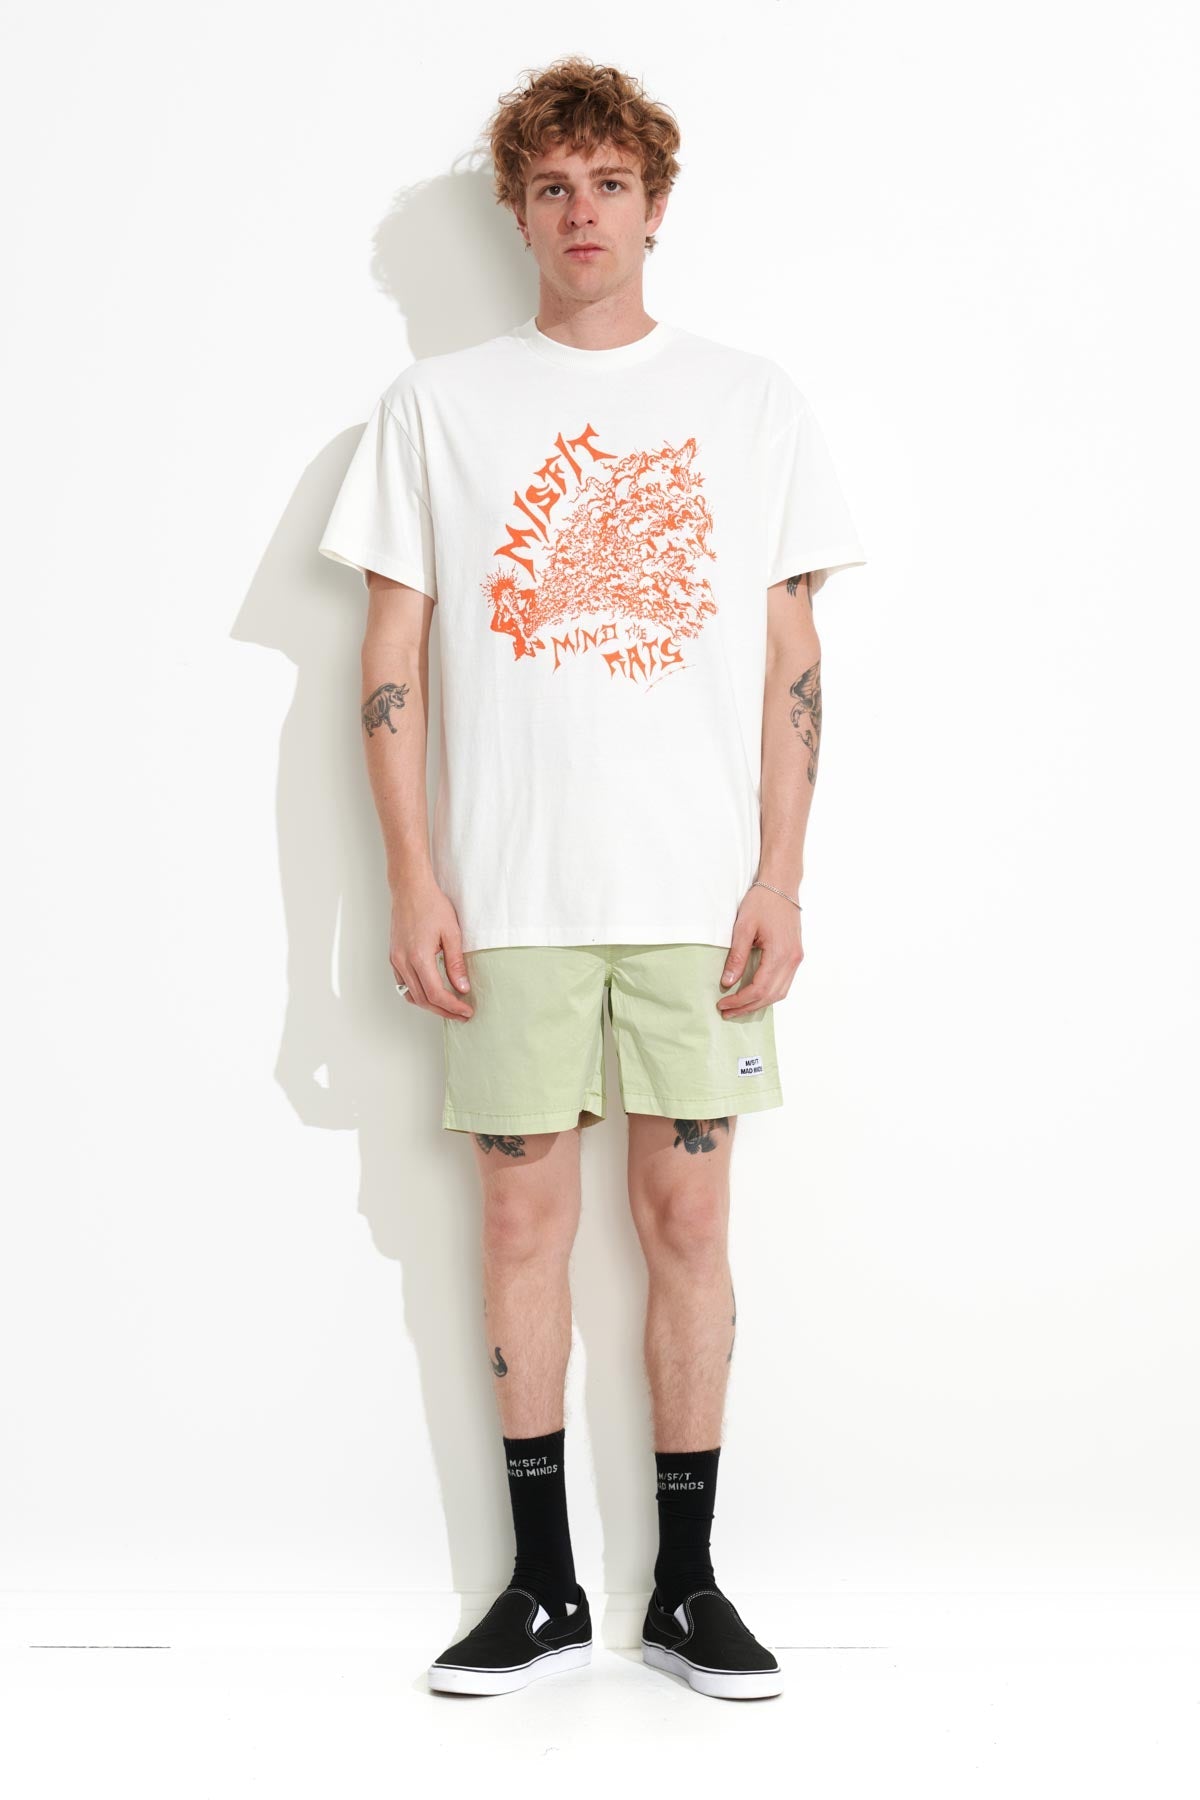 Misfit Shapes - Major Rato 50-50 SS Tee - Pigment Thrift White